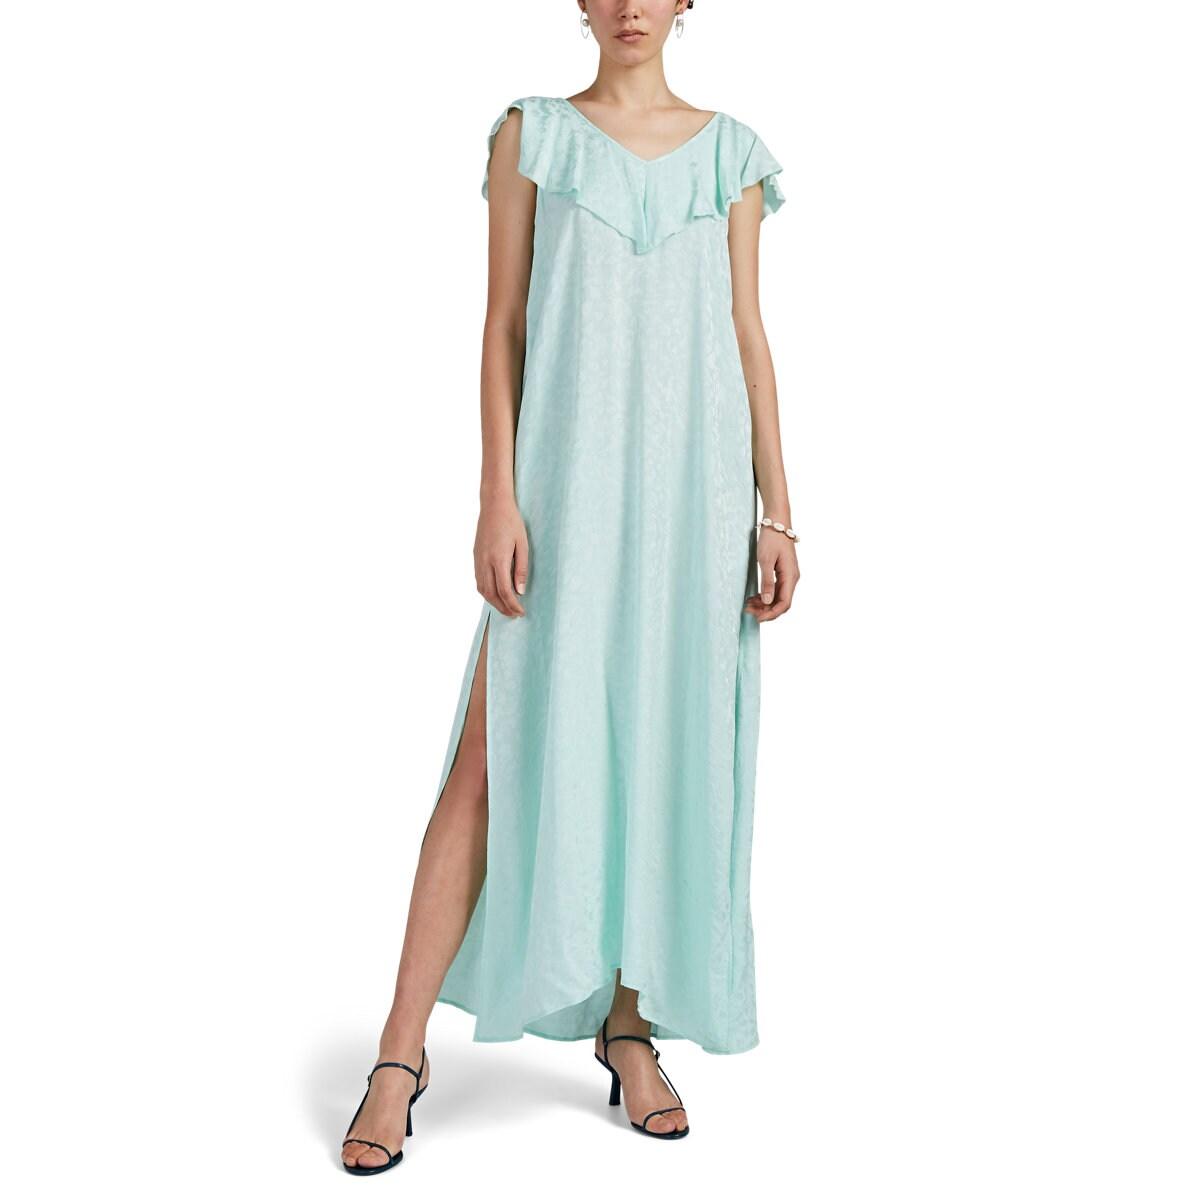 Zadig & Voltaire Reen Silk Maxi Dress in Turquoise (Blue) - Lyst